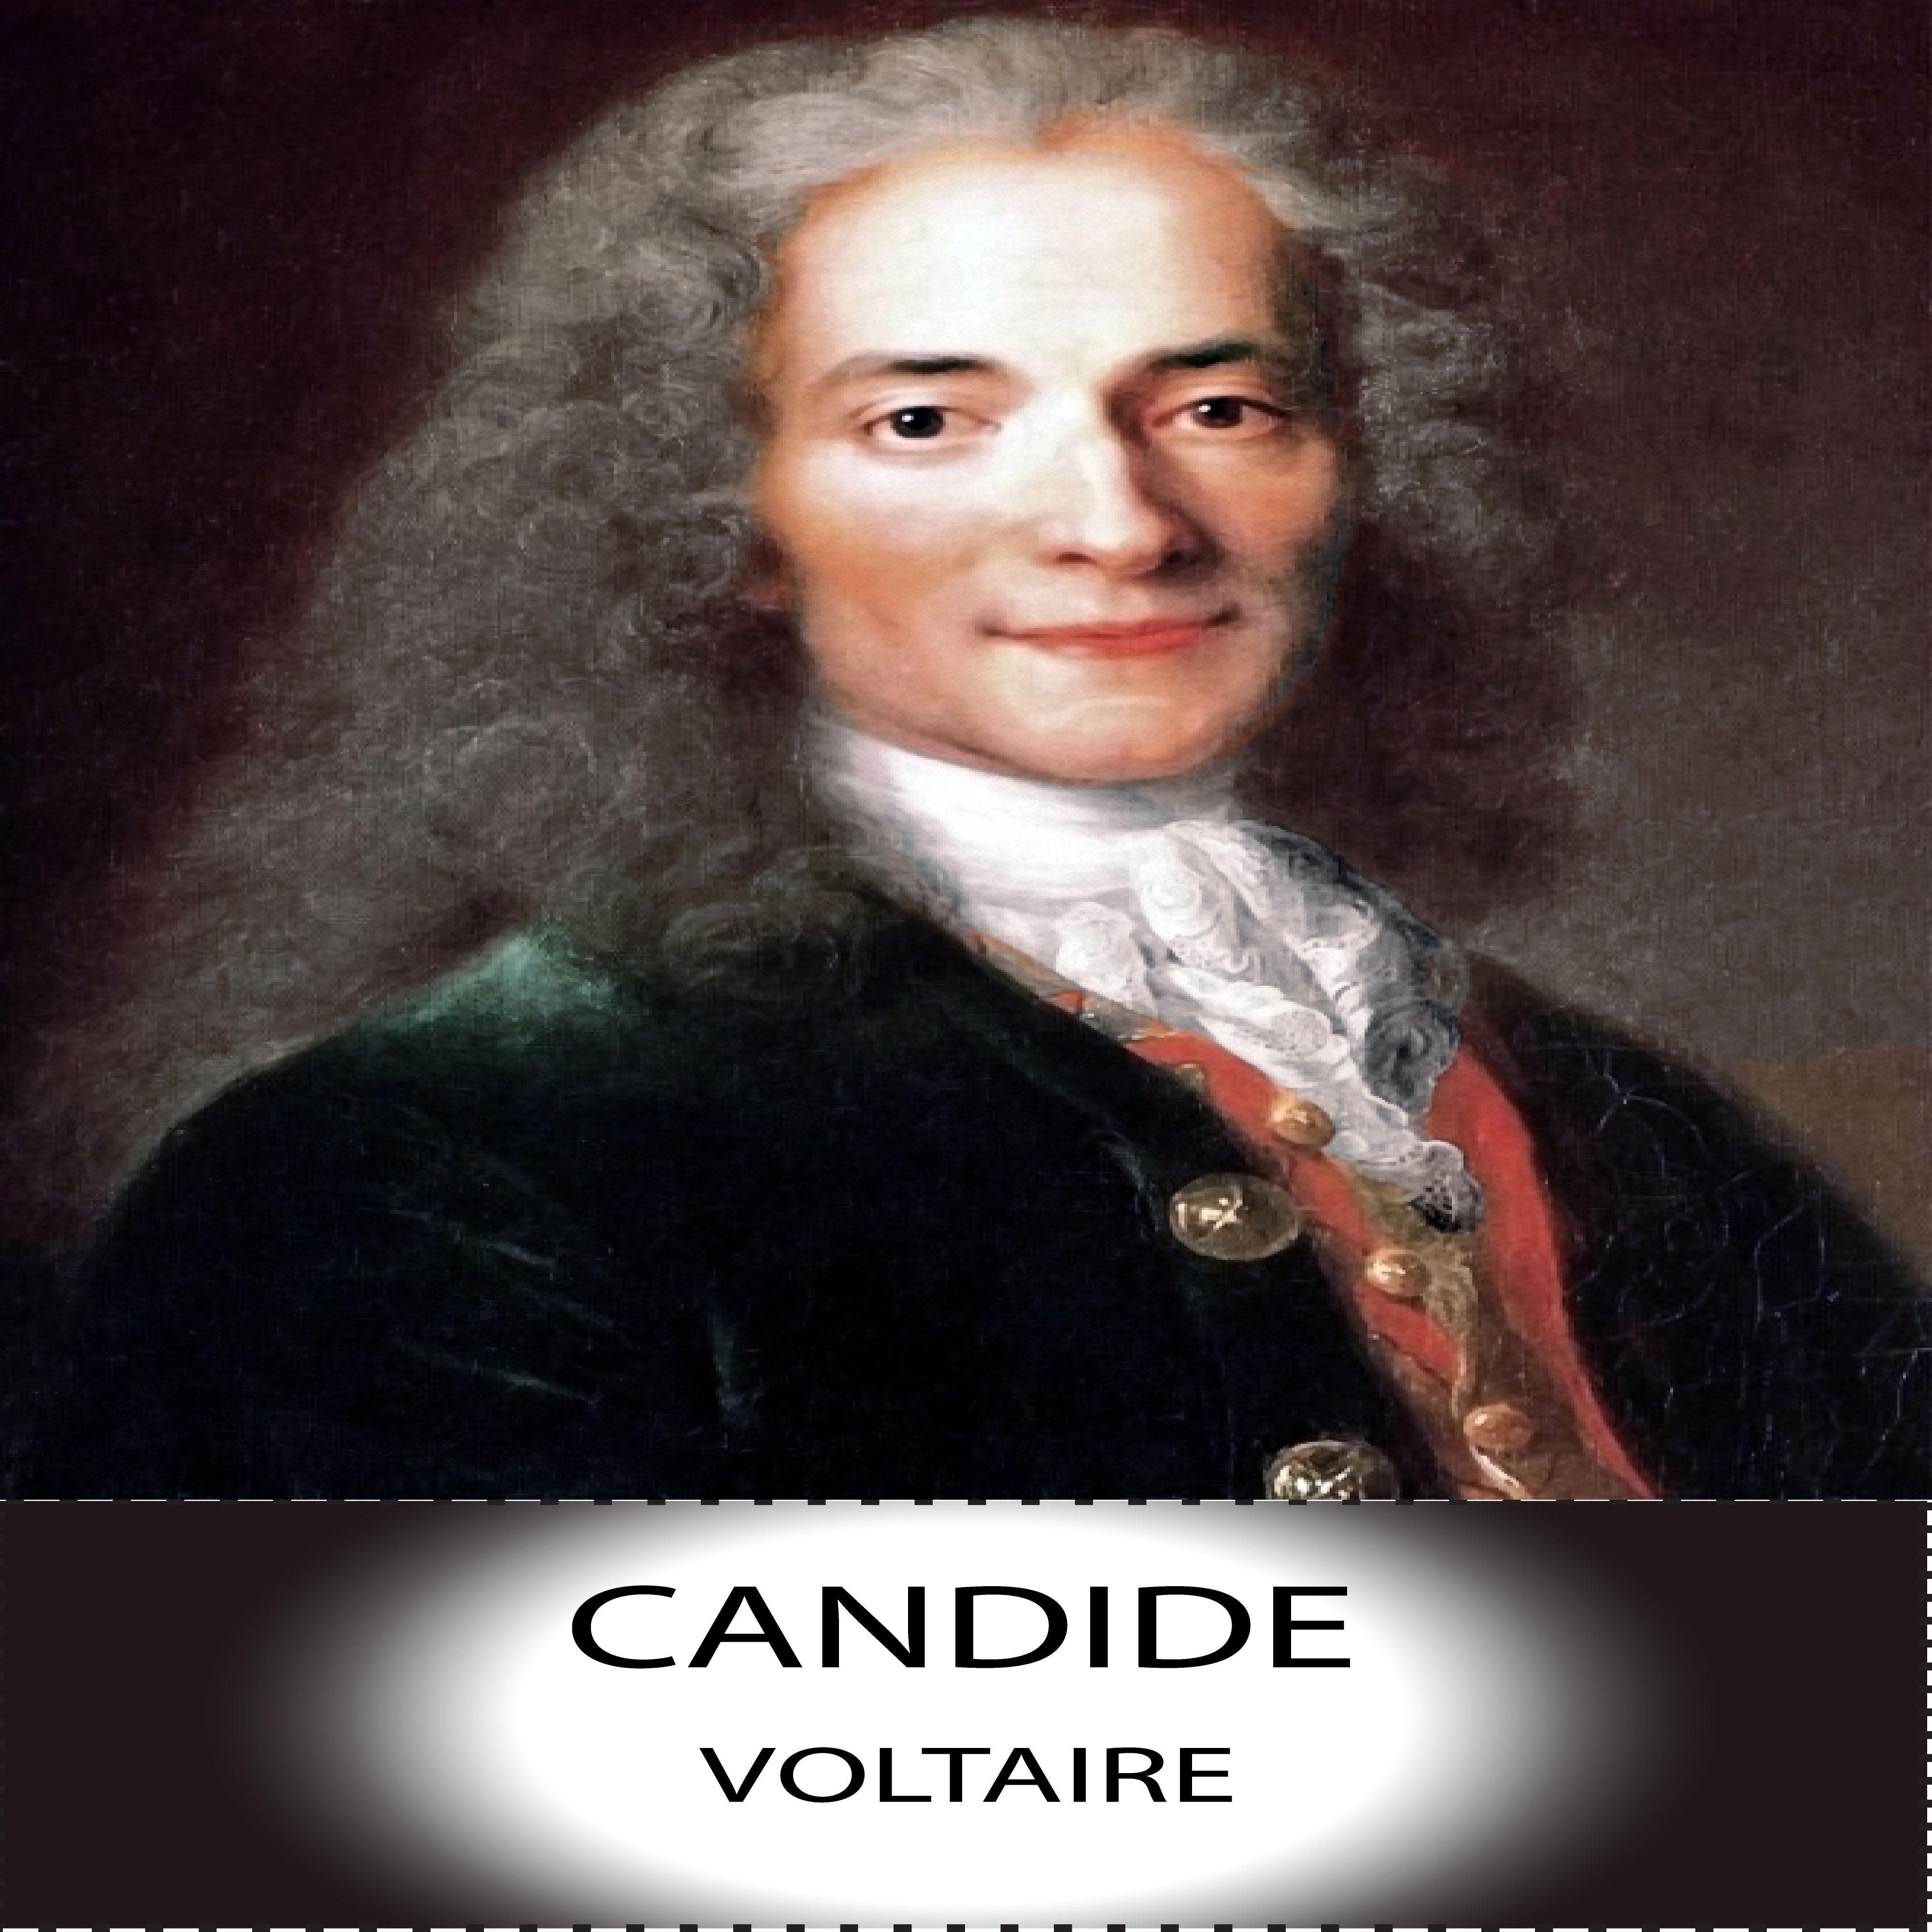 Voltaire: Candide, Chapter 8